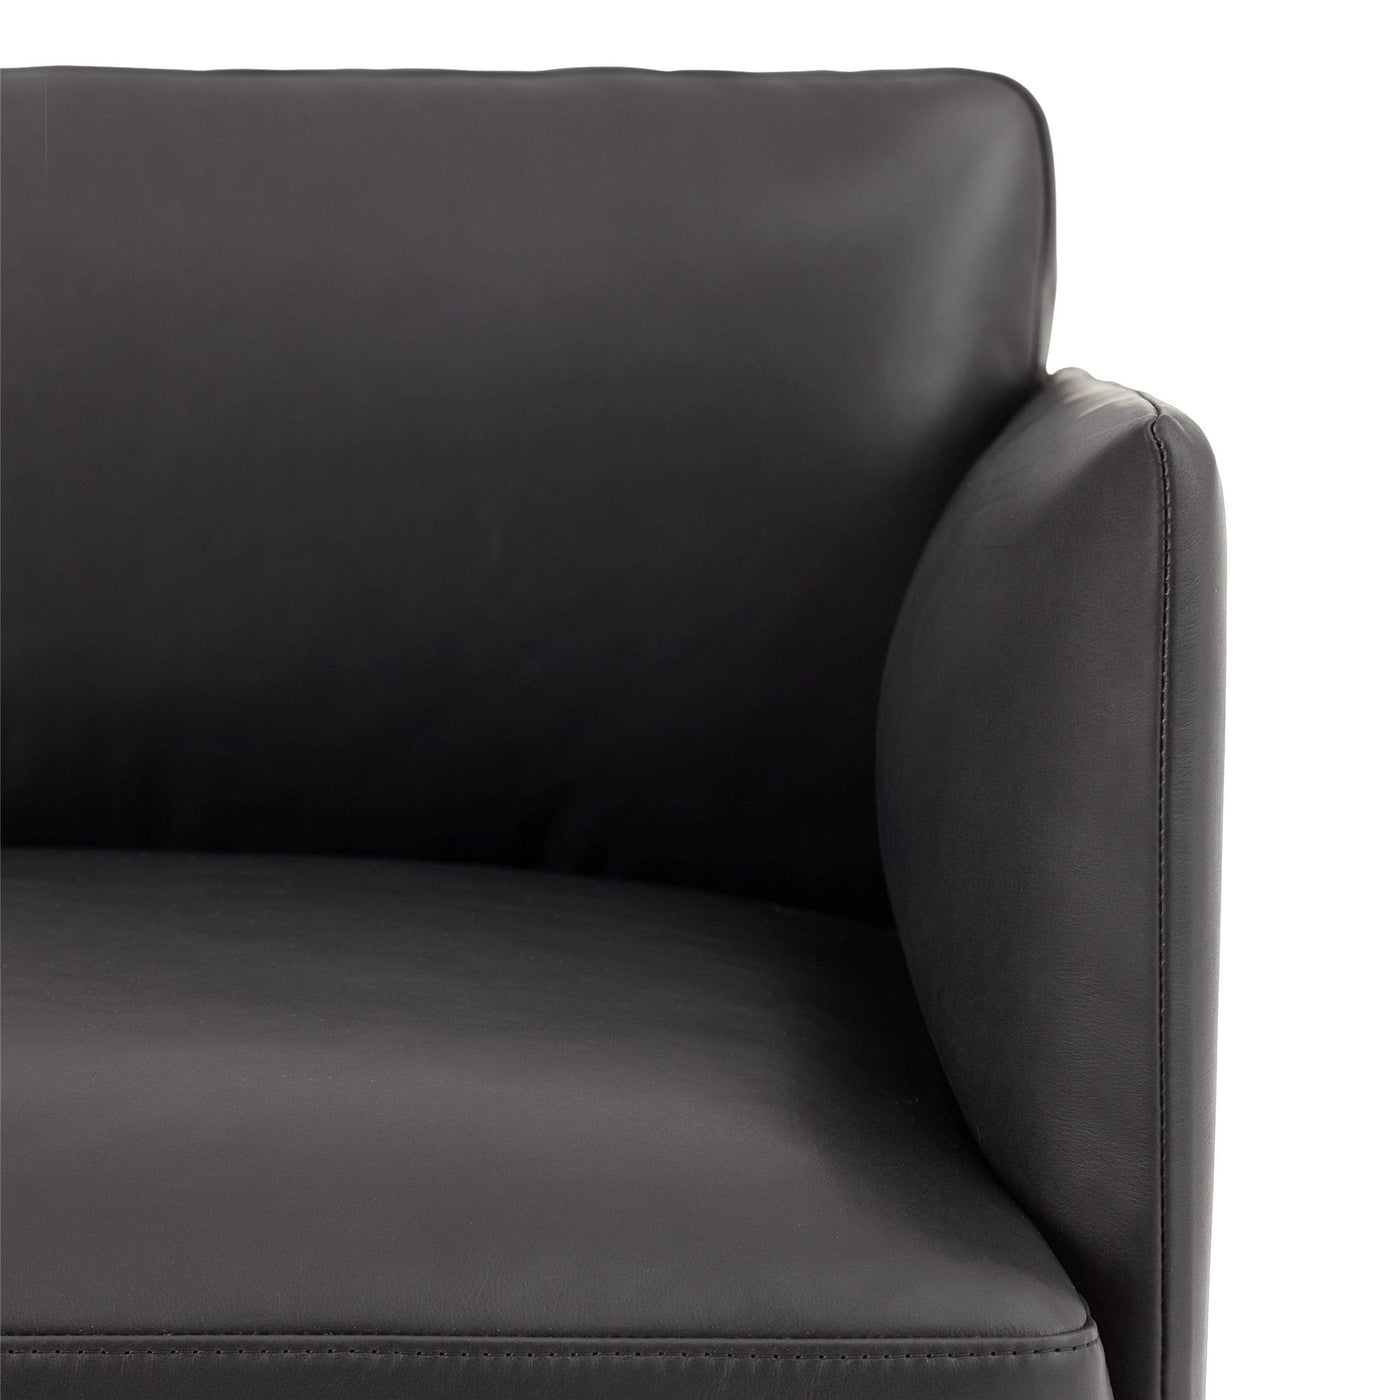 Muuto Outline Sofa in Black Refine Leather. Made to order from someday designs